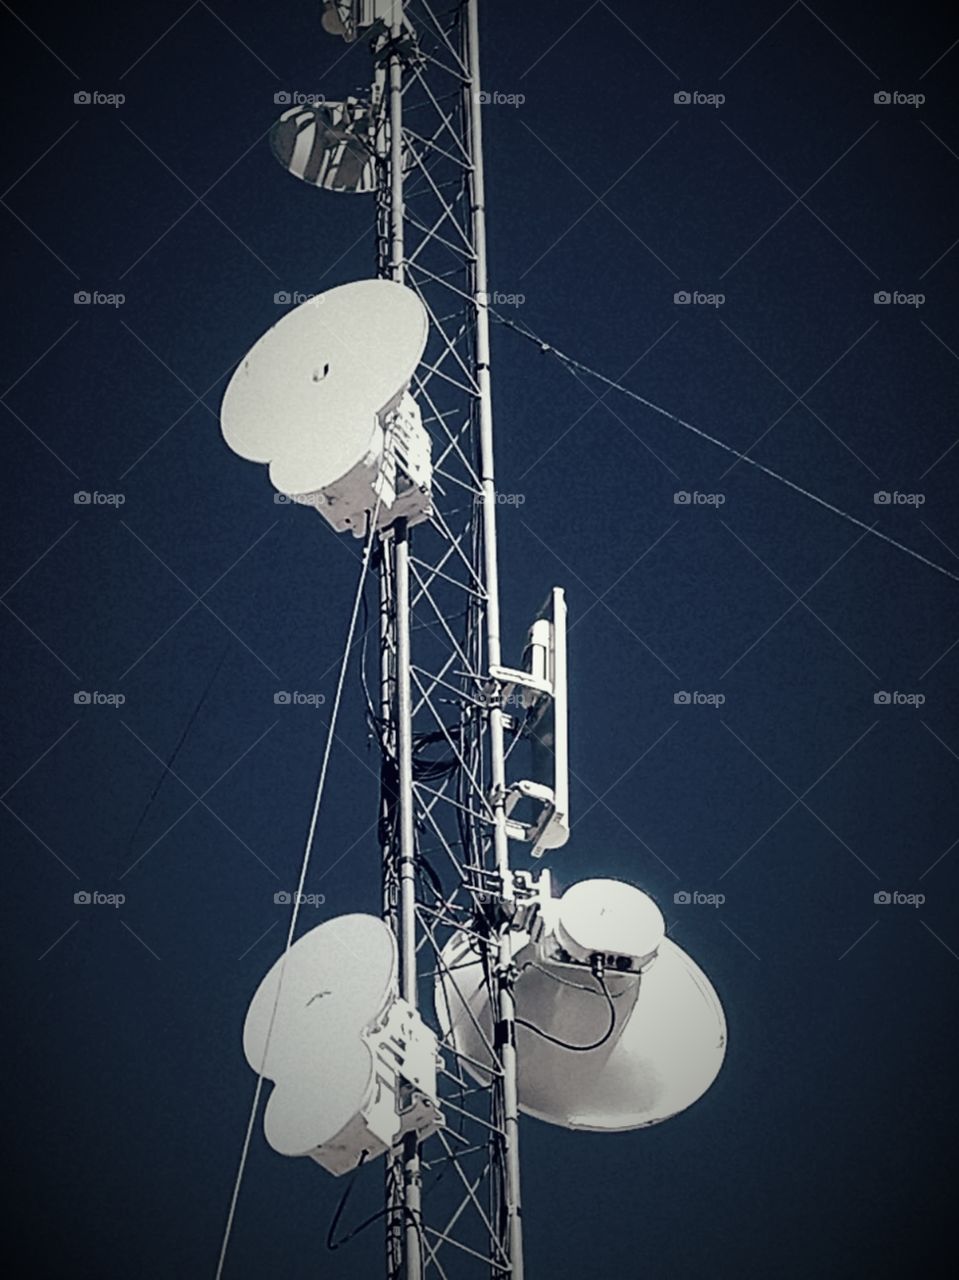 communications towers with radios